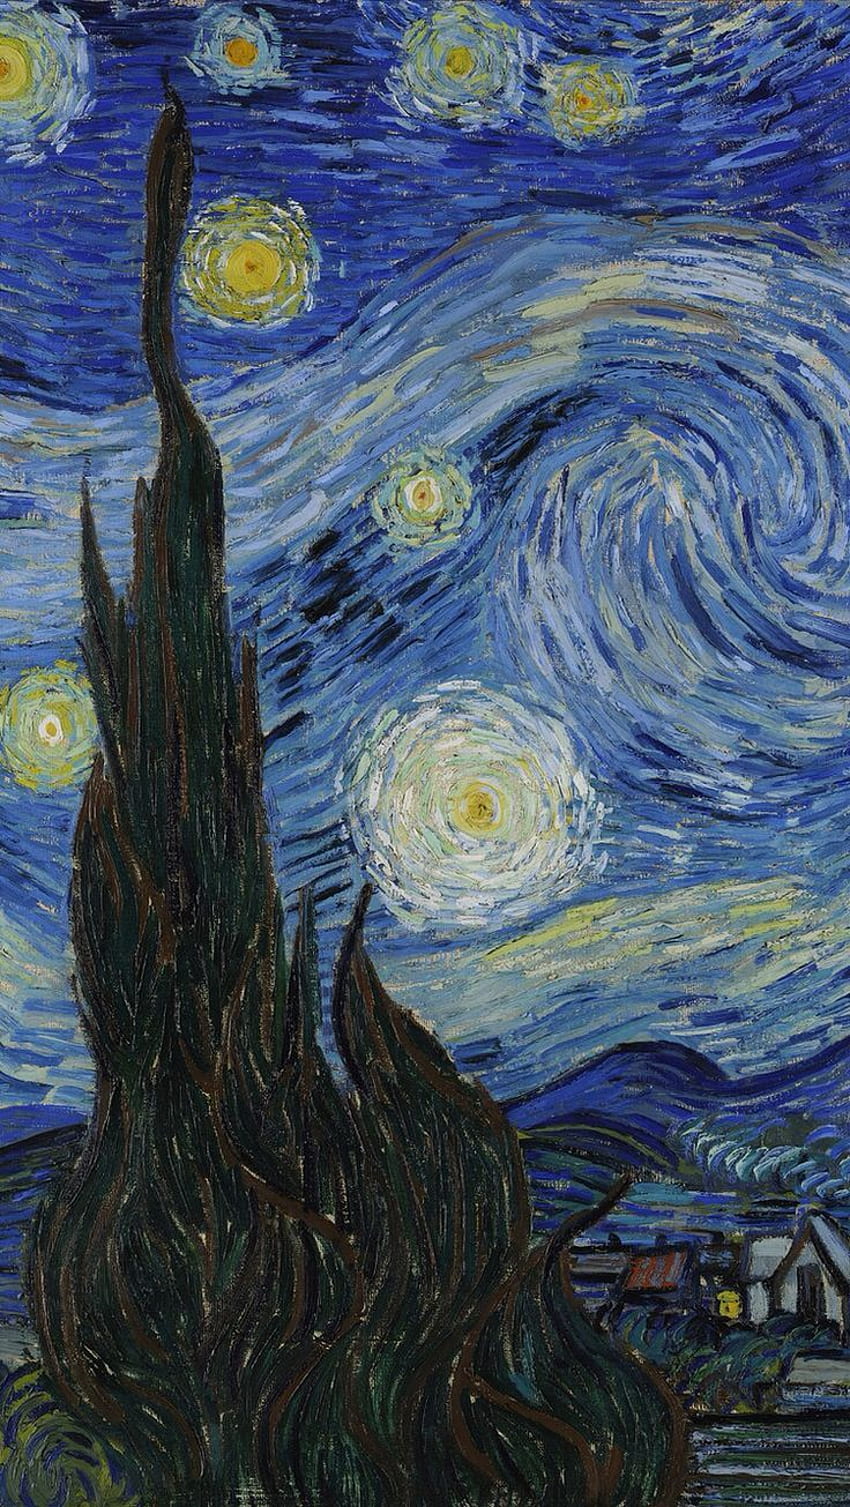 van gogh s painting in iphone more iphone gogh s [] for your , Mobile & Tablet. Explore Van Gogh for iPhone, Paintings HD phone wallpaper